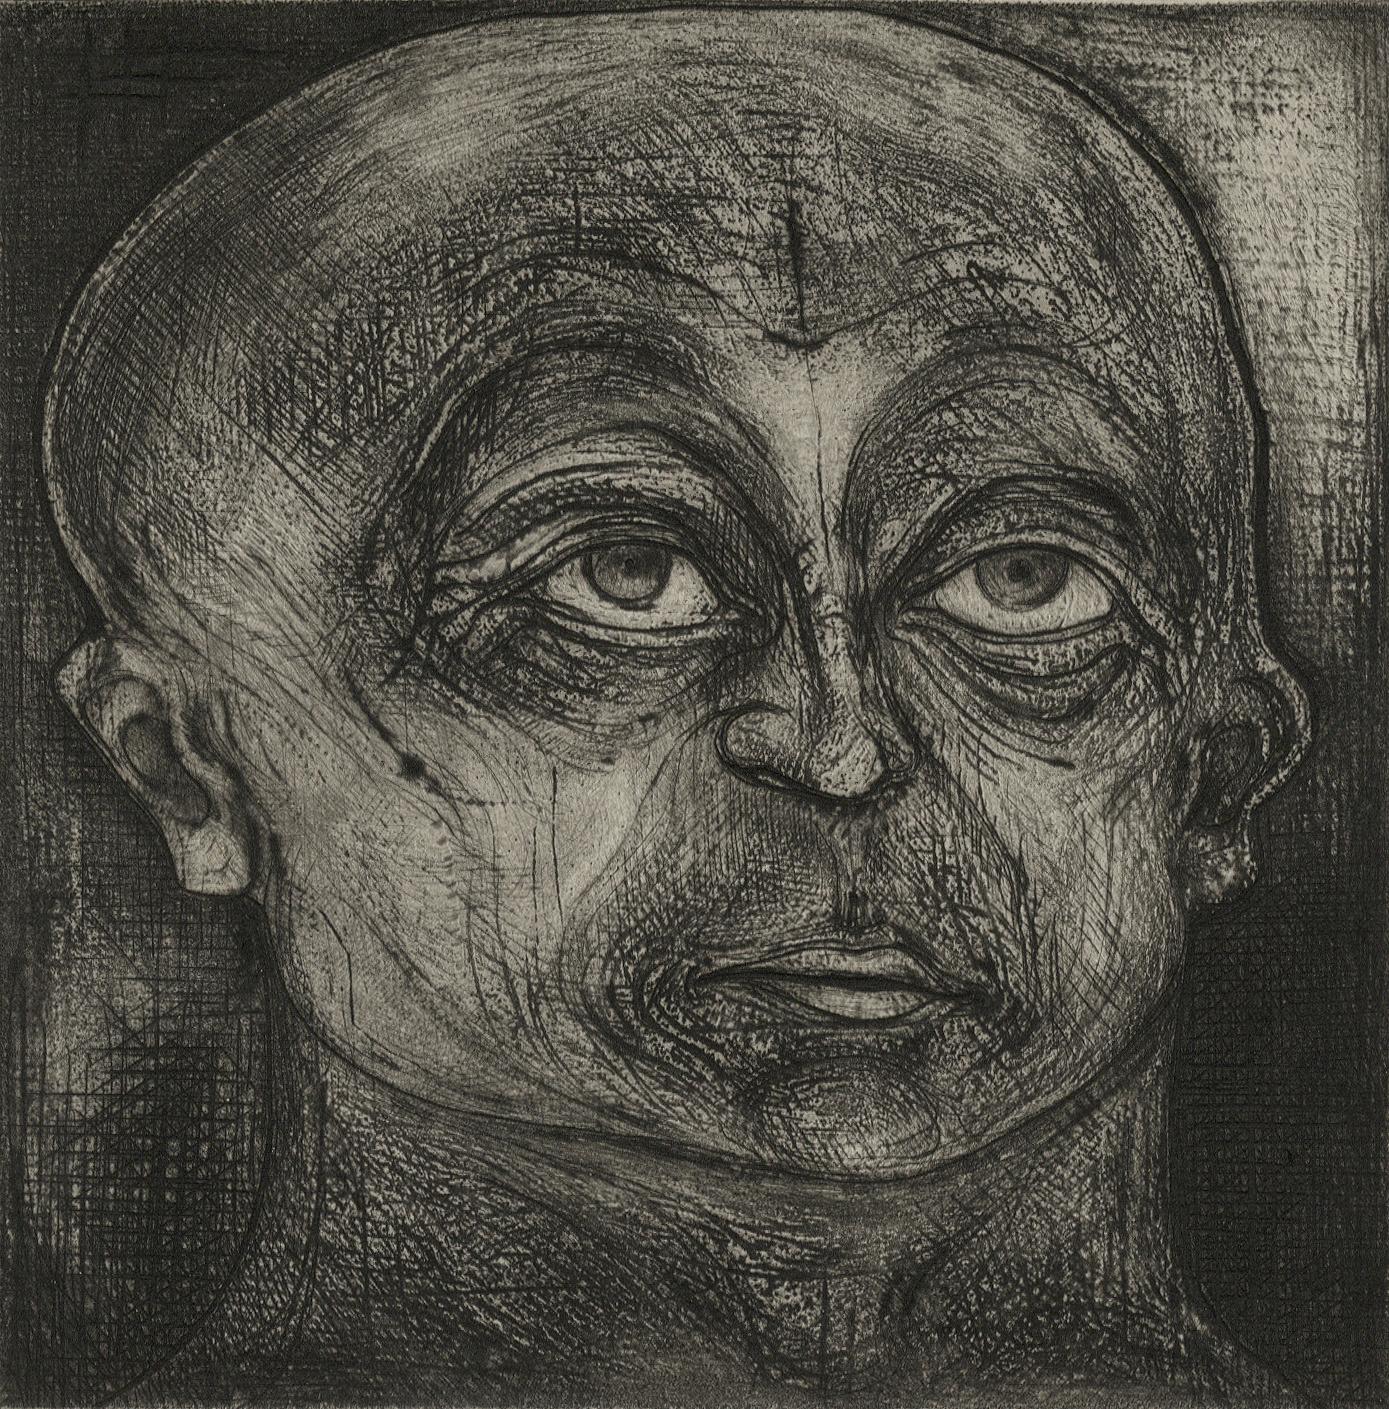 One of Twelve X (etchings of one of 12 heads based on  monumental sculpture)